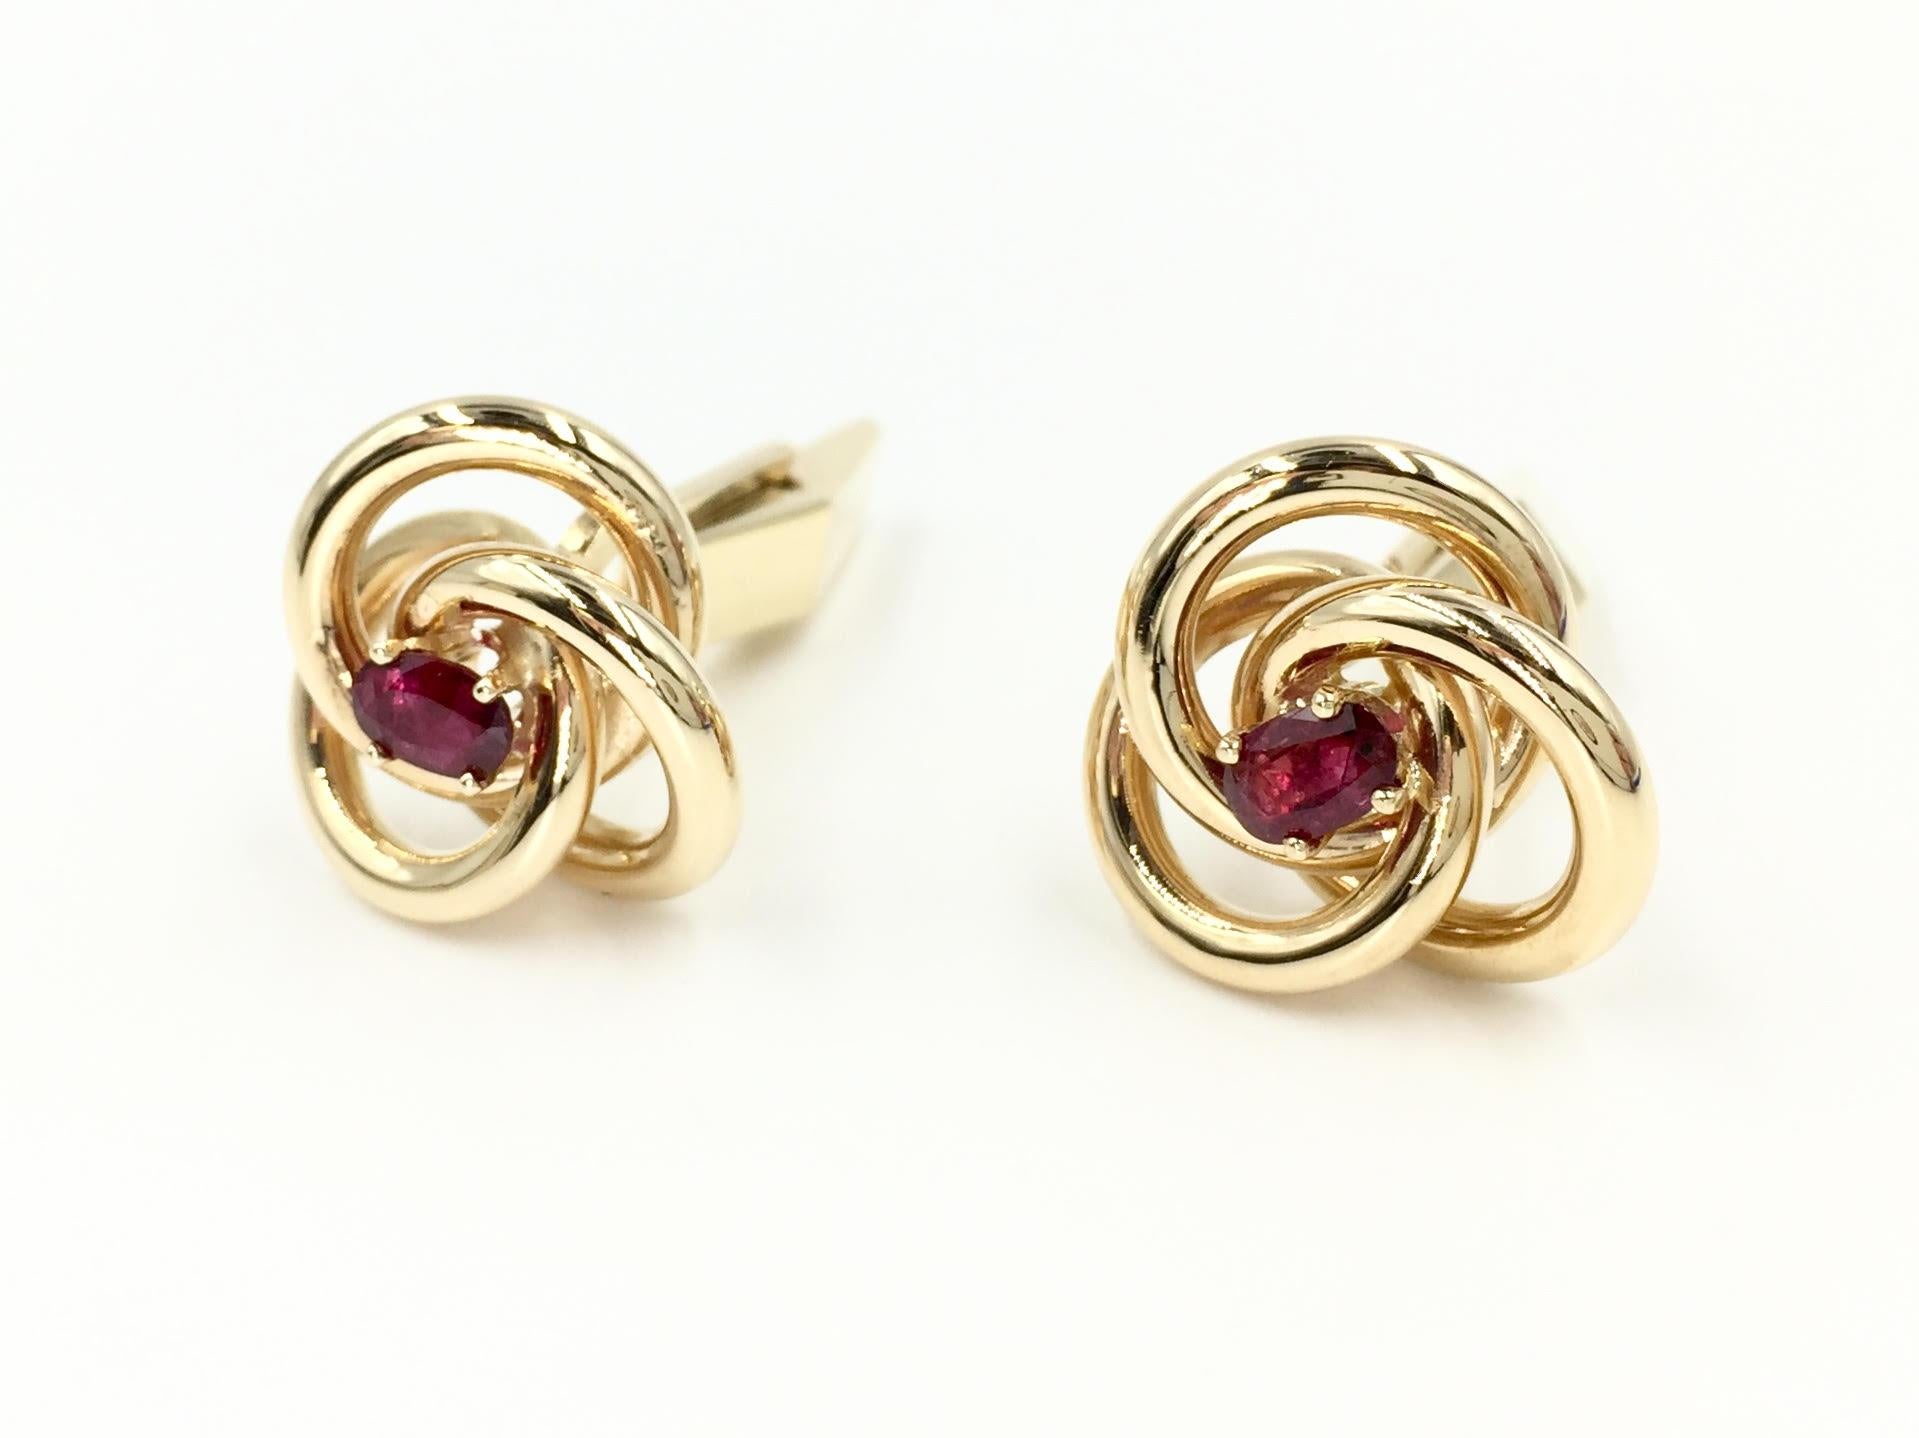 Contemporary 14 Karat Yellow Gold and Ruby Knot Cufflinks